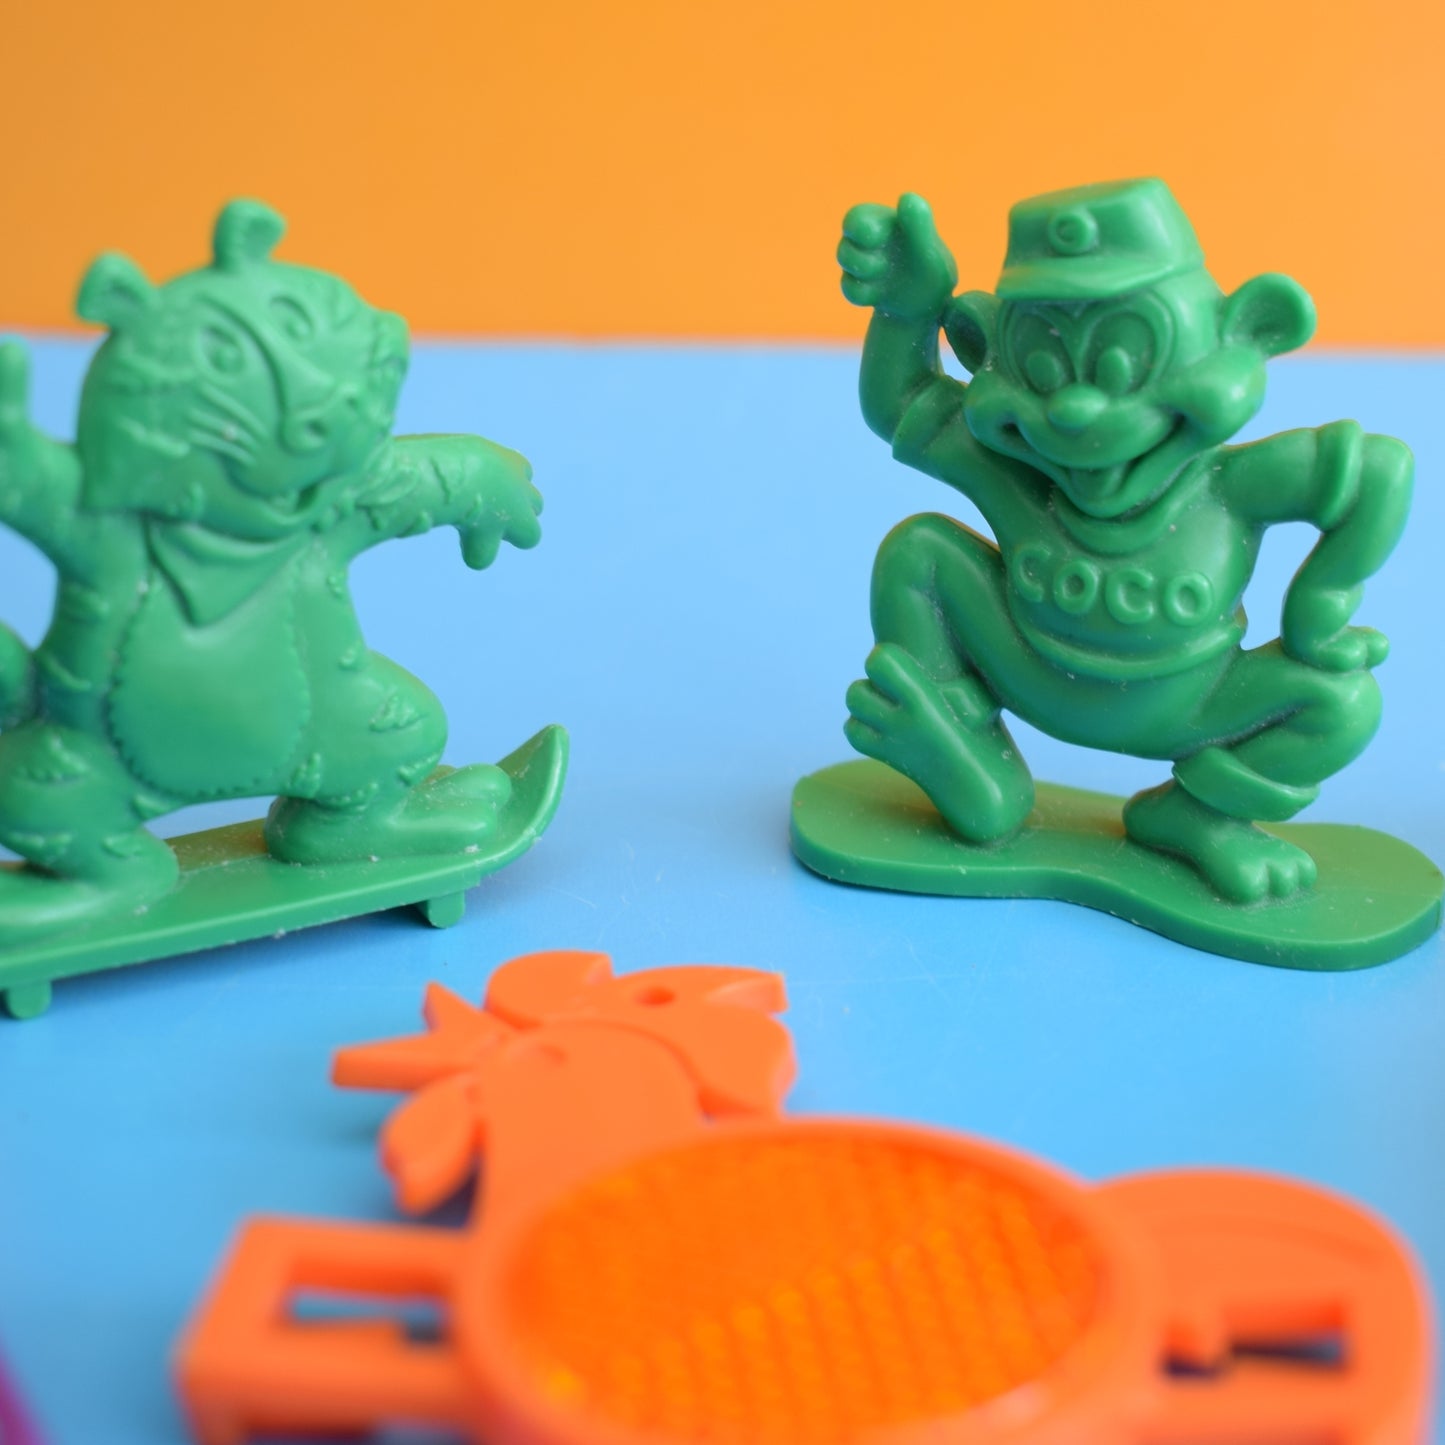 Vintage 1990s Kellogg's Cereal Toys